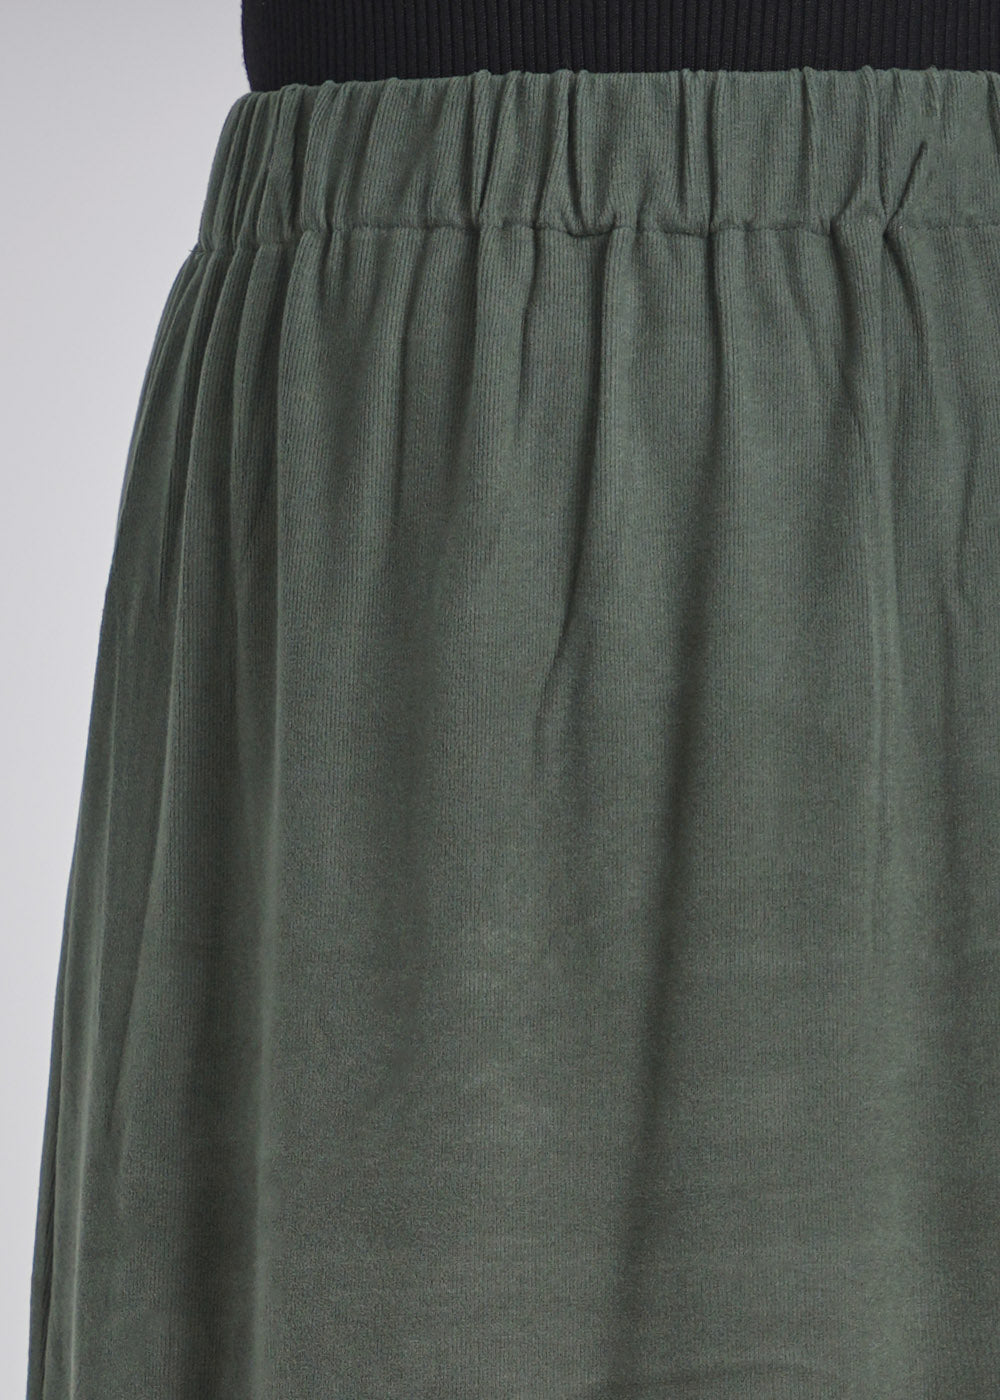 Classic Green Skirt with Black Stitch